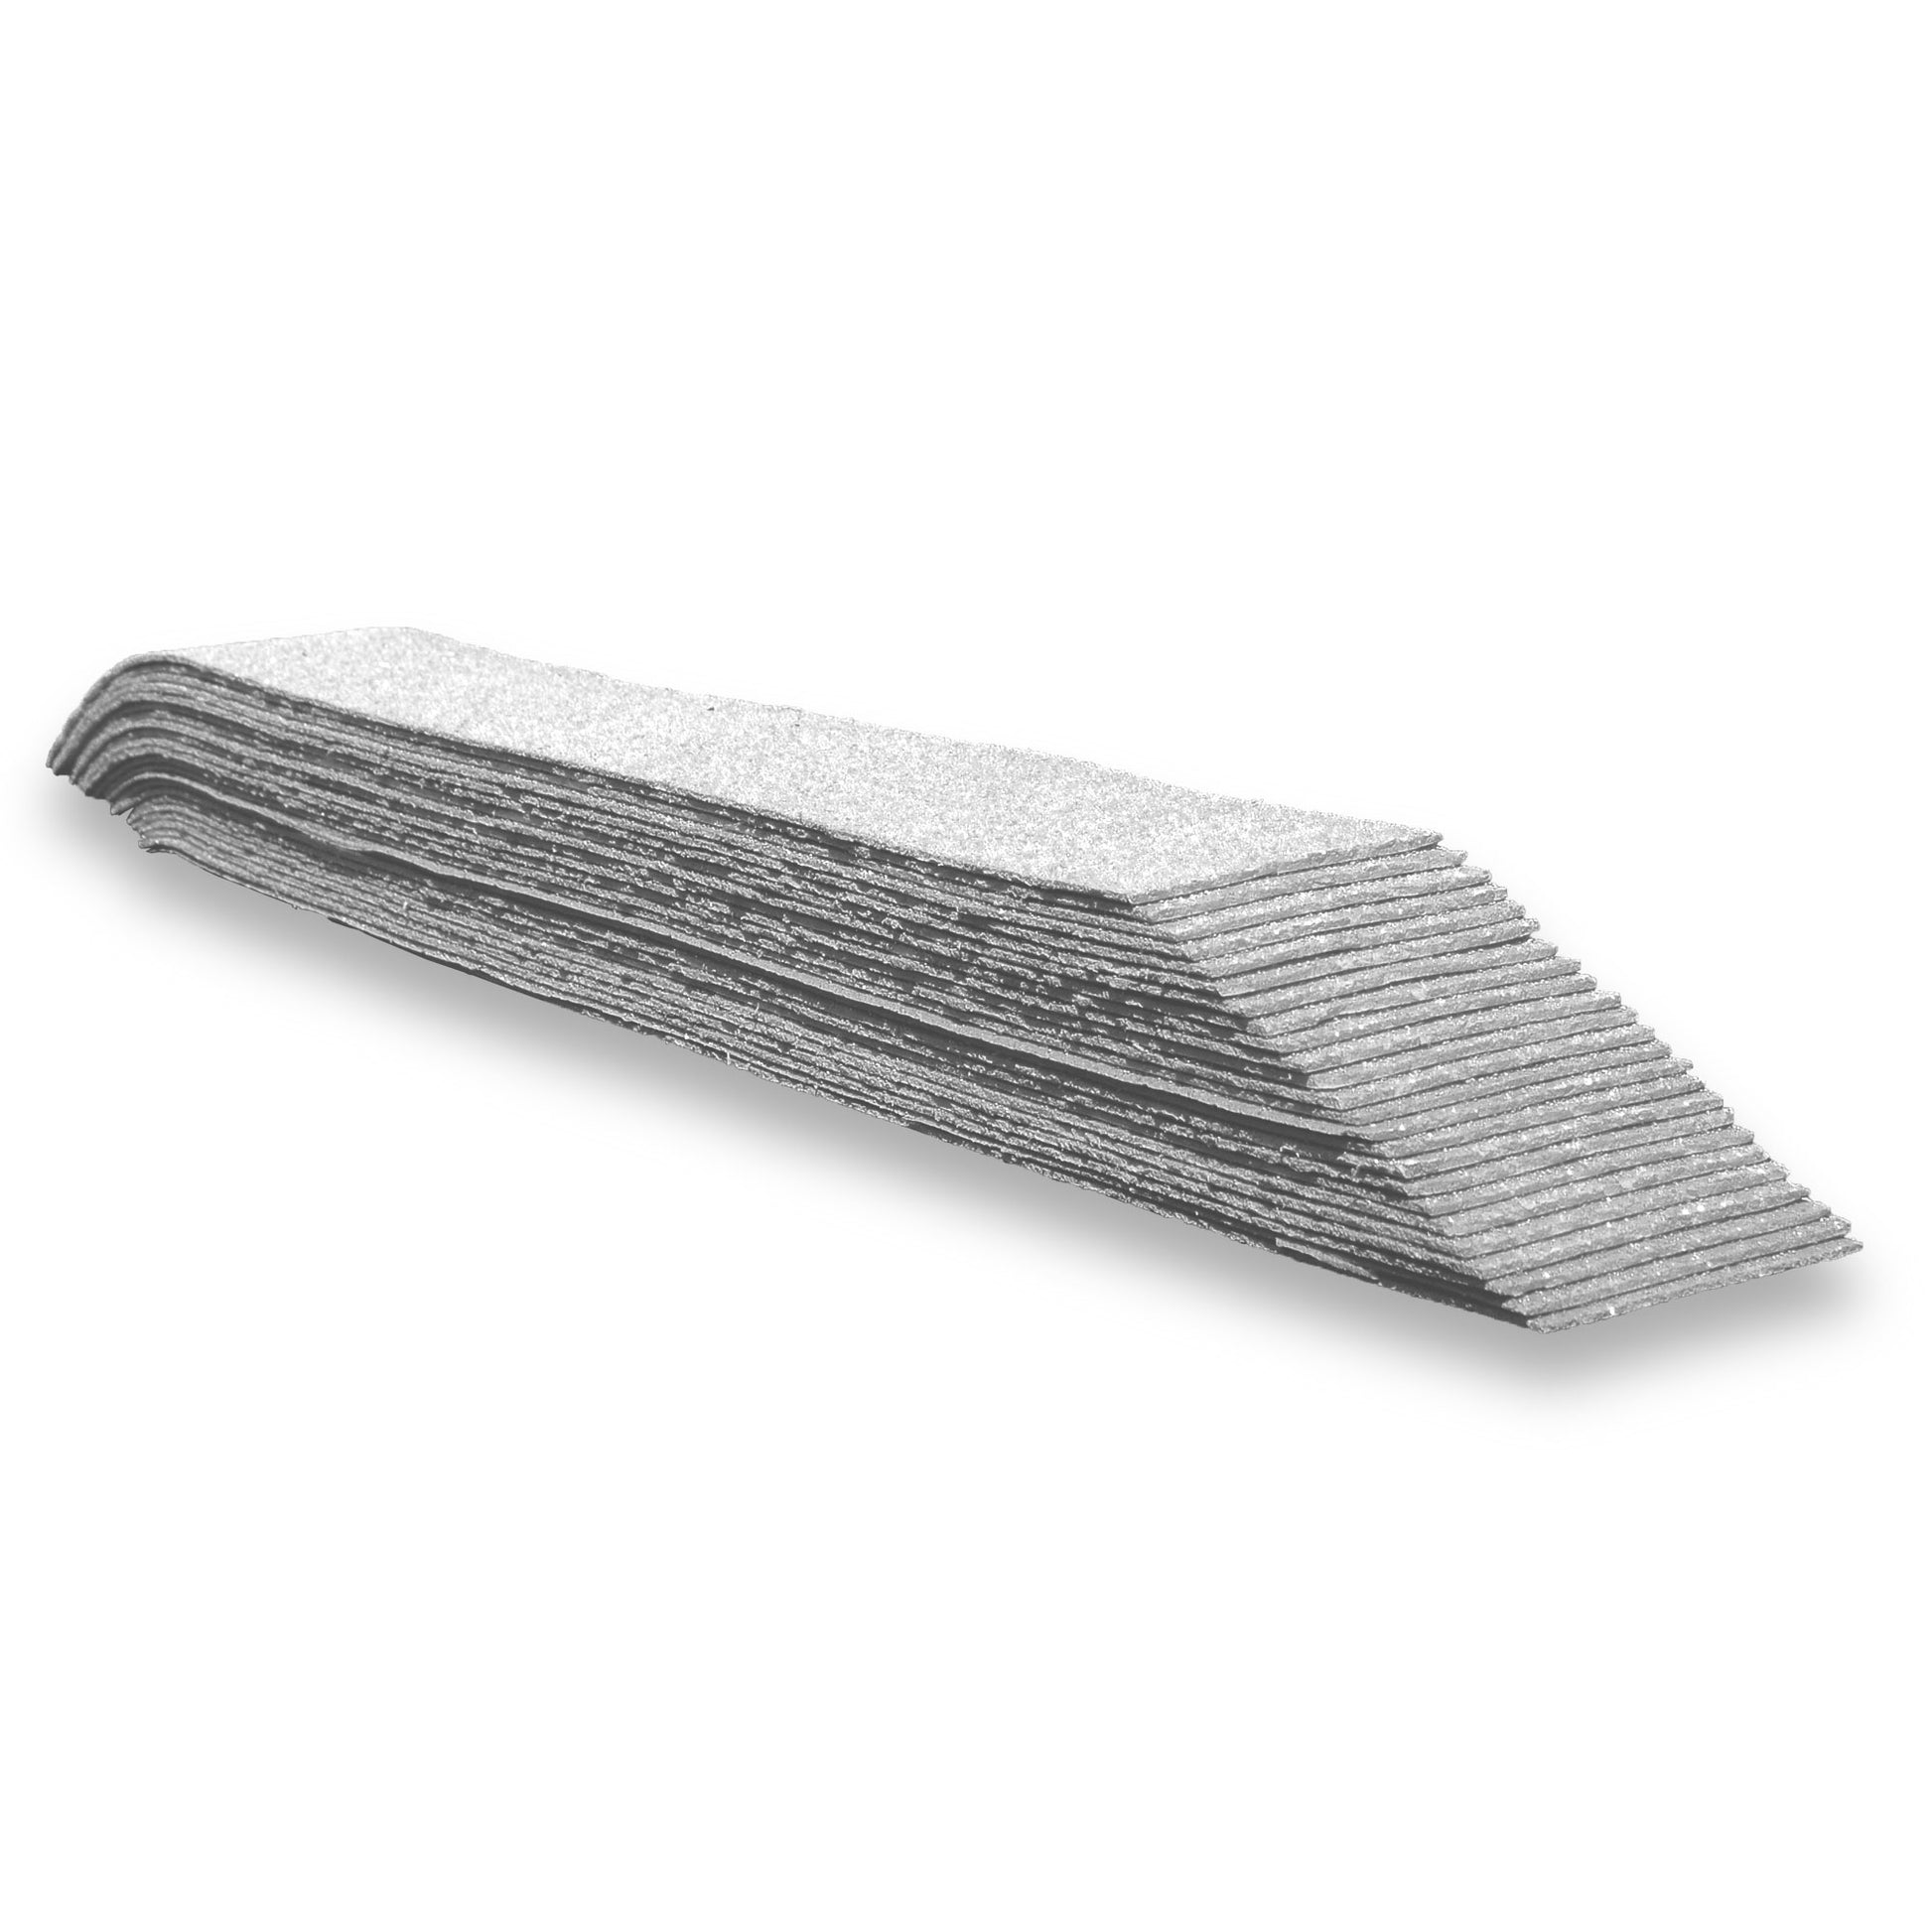 A stack of white thermoplastic lines